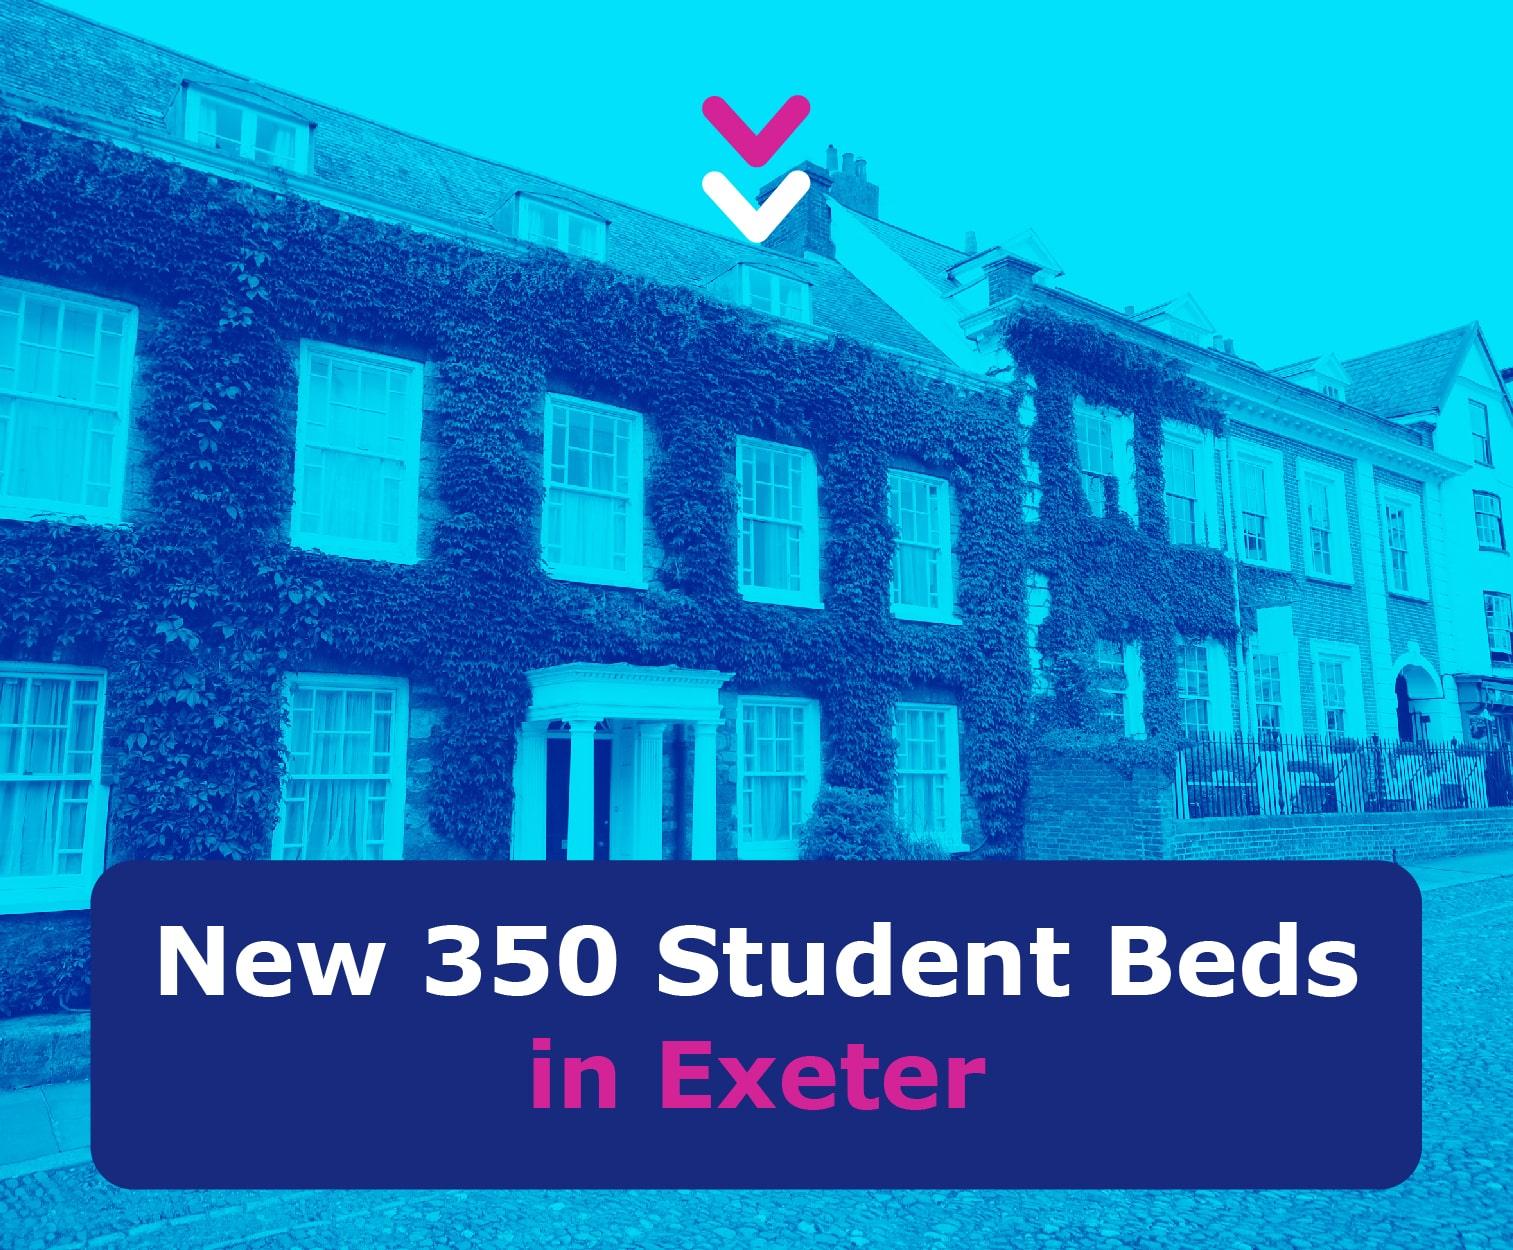 New 350 Student Beds to Be Added in Exeter